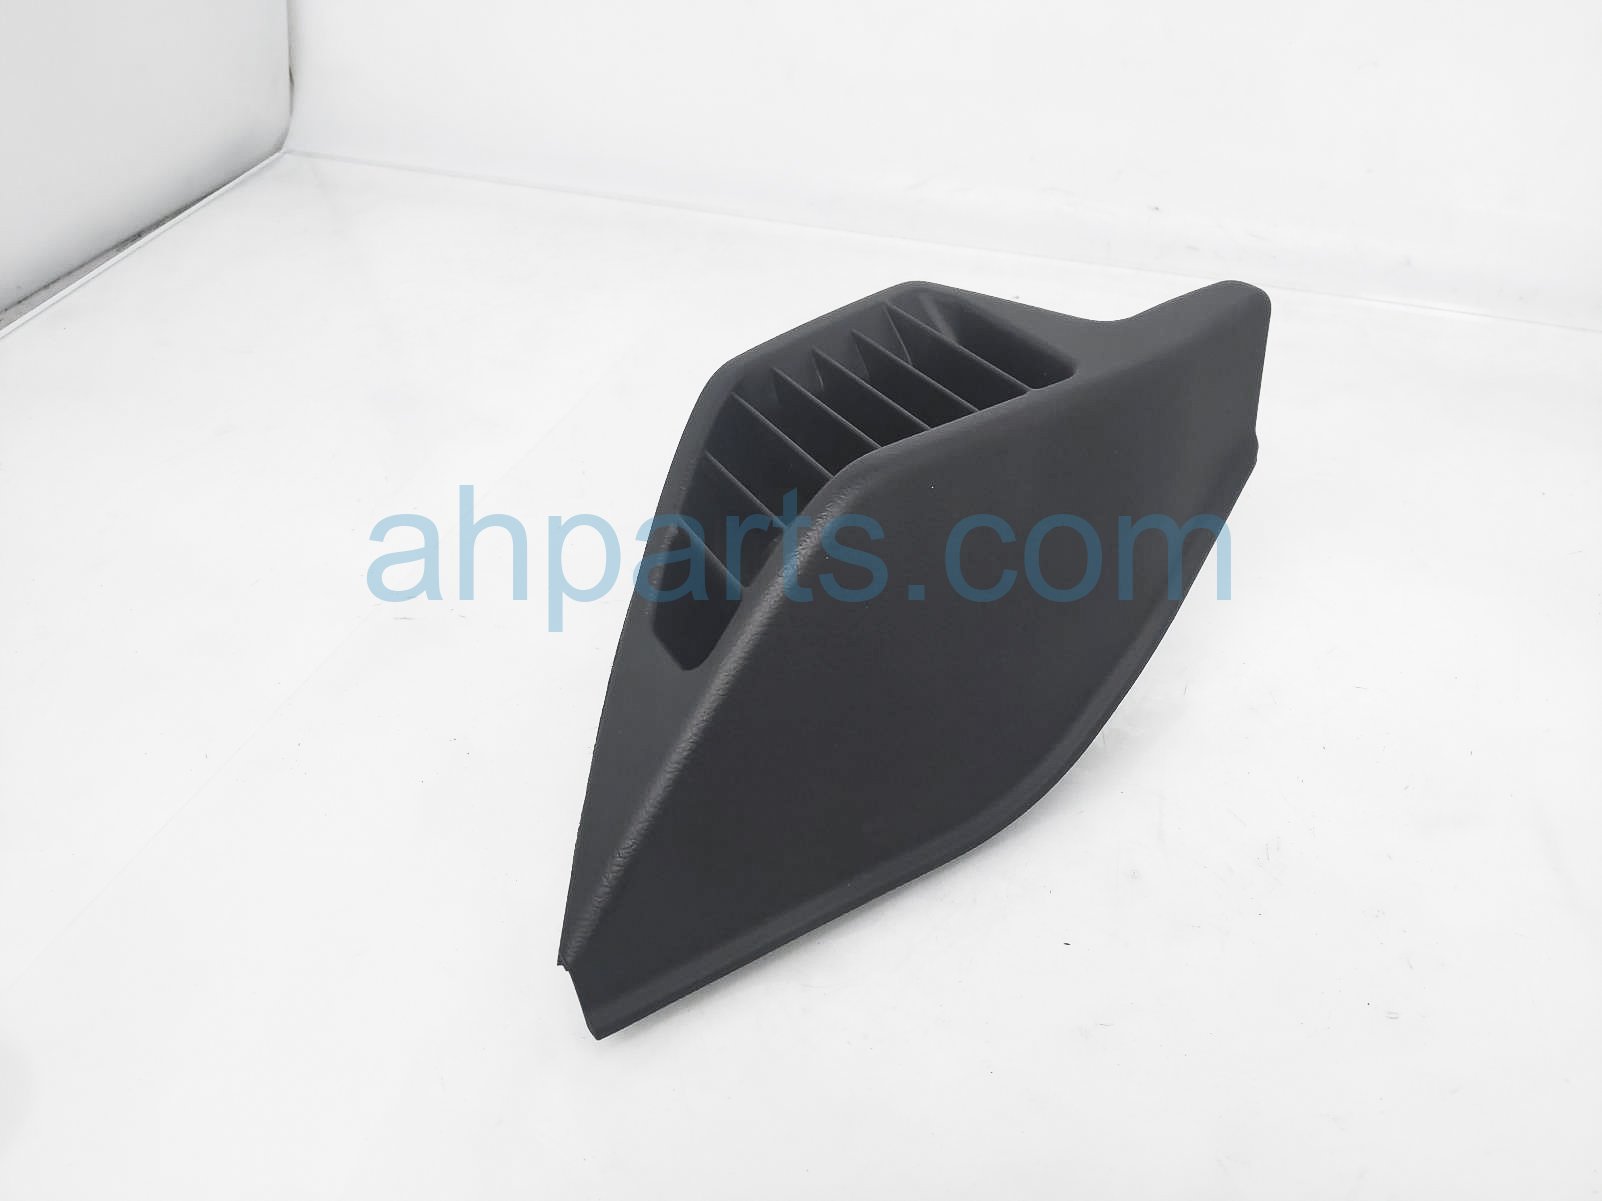 $45 Acura RH DASHBOARD AIR VENT OUTLET COVER